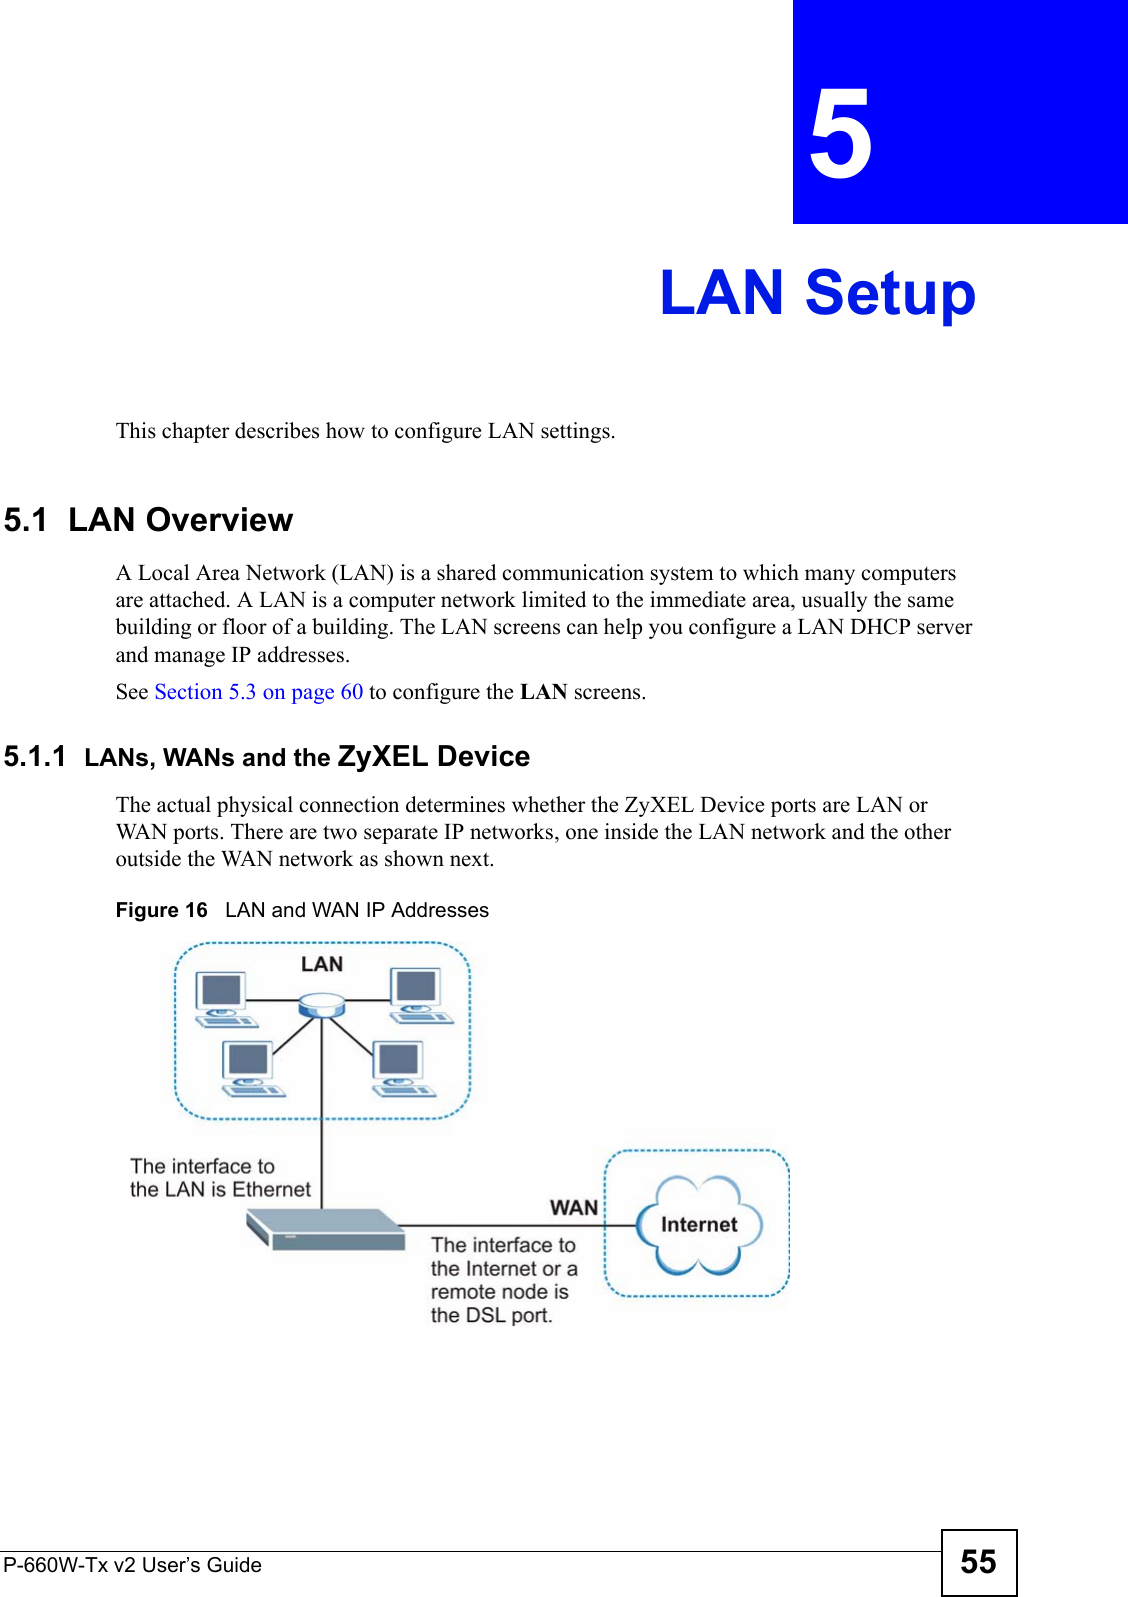 P-660W-Tx v2 User’s Guide 55CHAPTER  5 LAN SetupThis chapter describes how to configure LAN settings.5.1  LAN Overview A Local Area Network (LAN) is a shared communication system to which many computers are attached. A LAN is a computer network limited to the immediate area, usually the same building or floor of a building. The LAN screens can help you configure a LAN DHCP server and manage IP addresses.  See Section 5.3 on page 60 to configure the LAN screens. 5.1.1  LANs, WANs and the ZyXEL DeviceThe actual physical connection determines whether the ZyXEL Device ports are LAN or WAN ports. There are two separate IP networks, one inside the LAN network and the other outside the WAN network as shown next.Figure 16   LAN and WAN IP Addresses